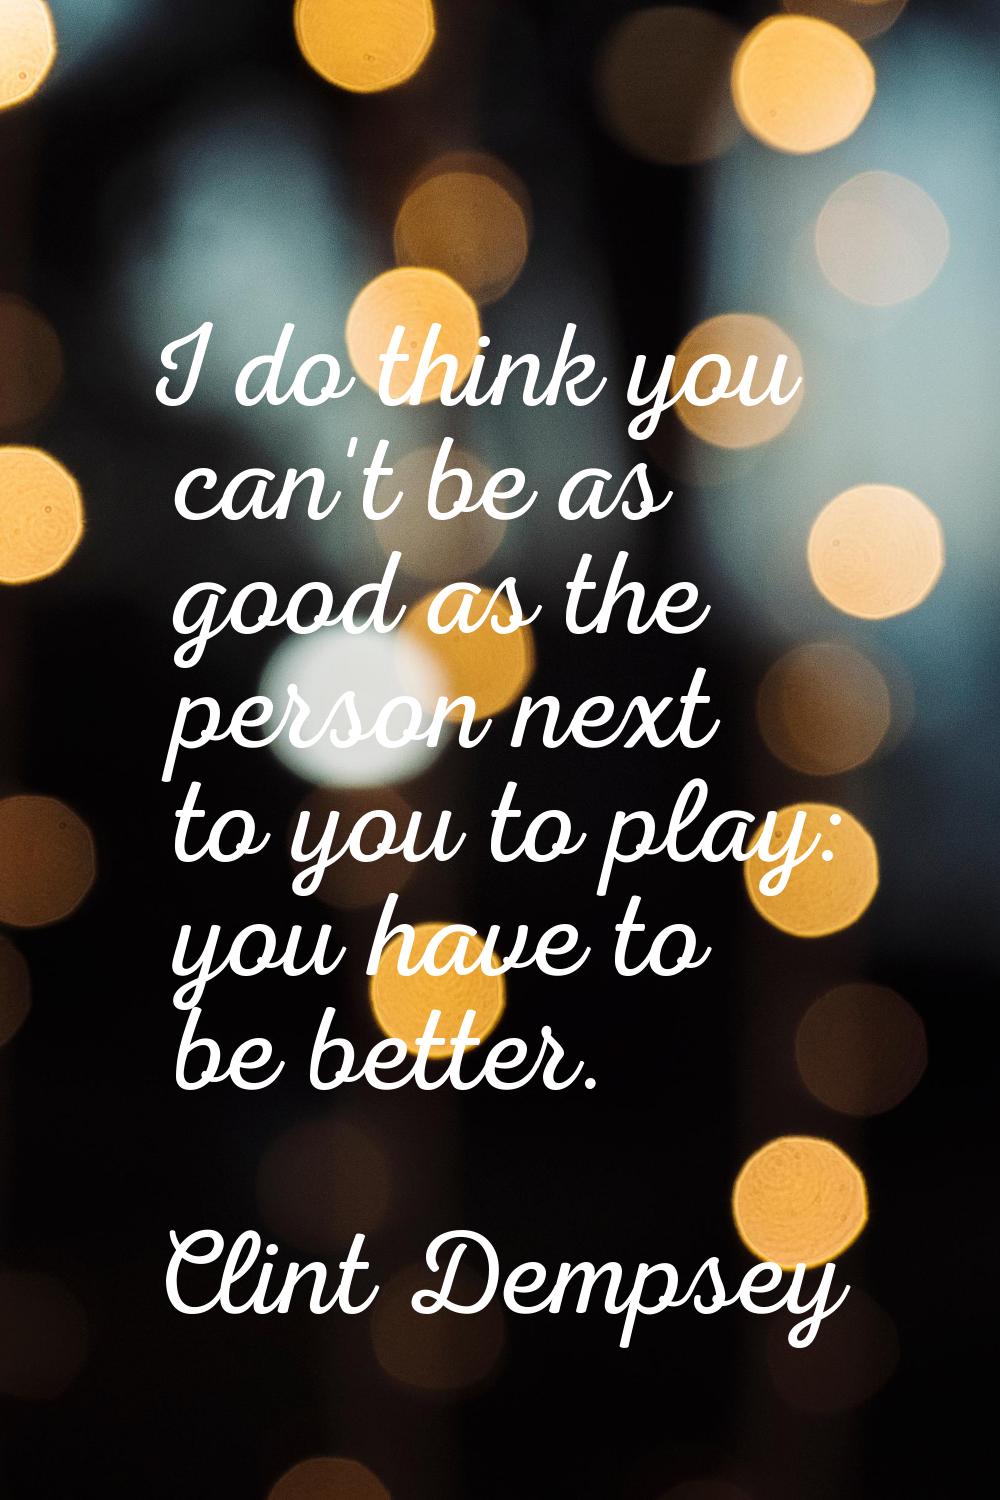 I do think you can't be as good as the person next to you to play: you have to be better.